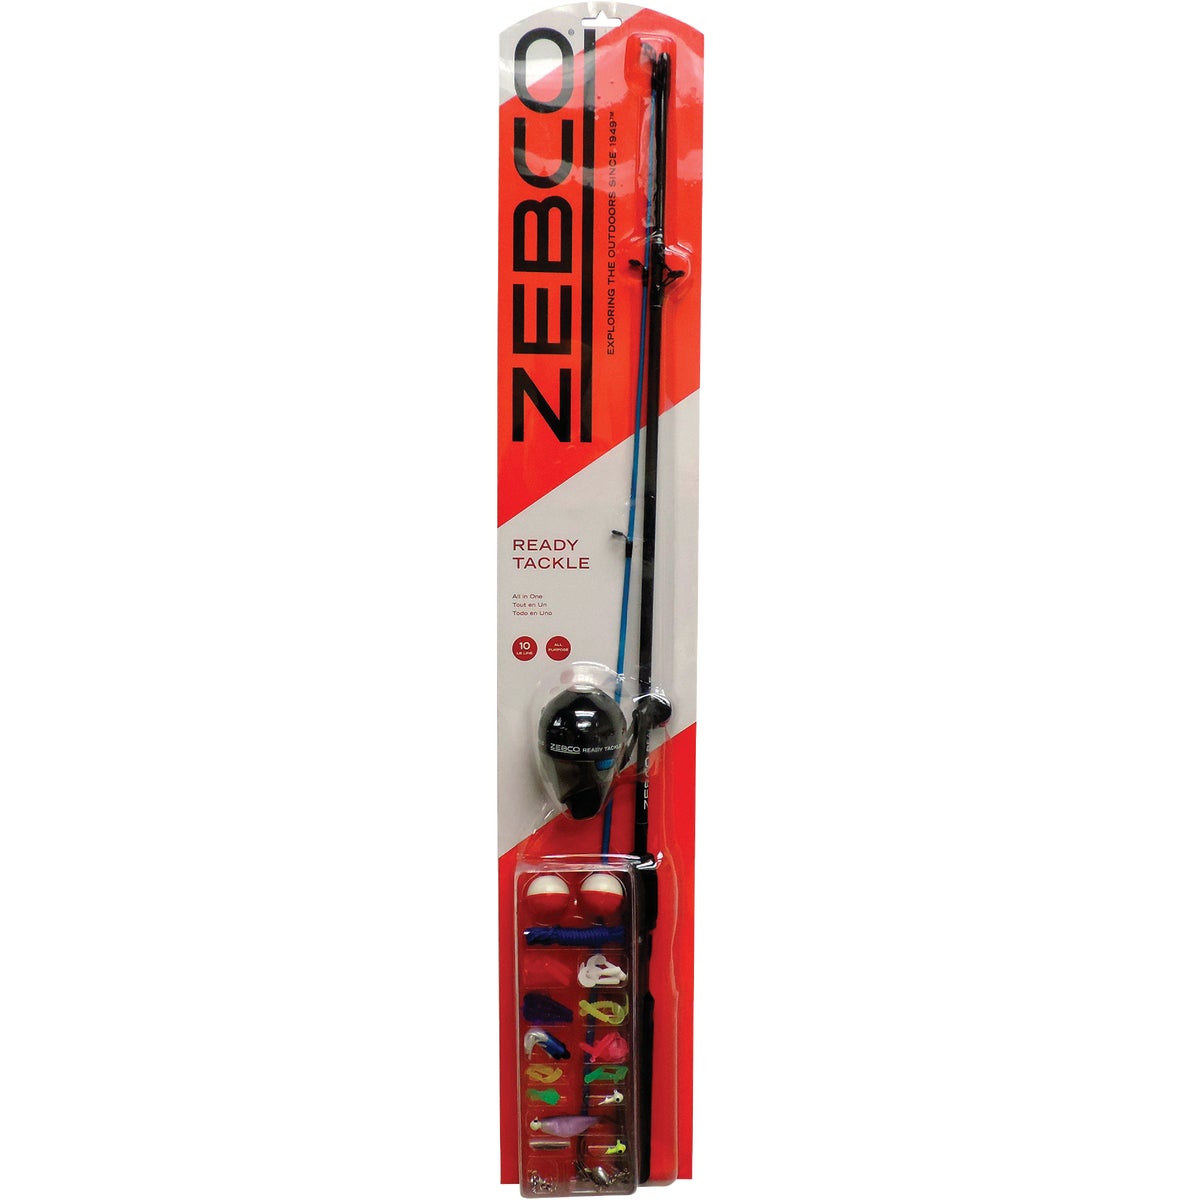 Zebco Ready Tackle 5 Ft. 6 In. Z-Glass Fishing Rod & Spincast Reel with Tackle Kit